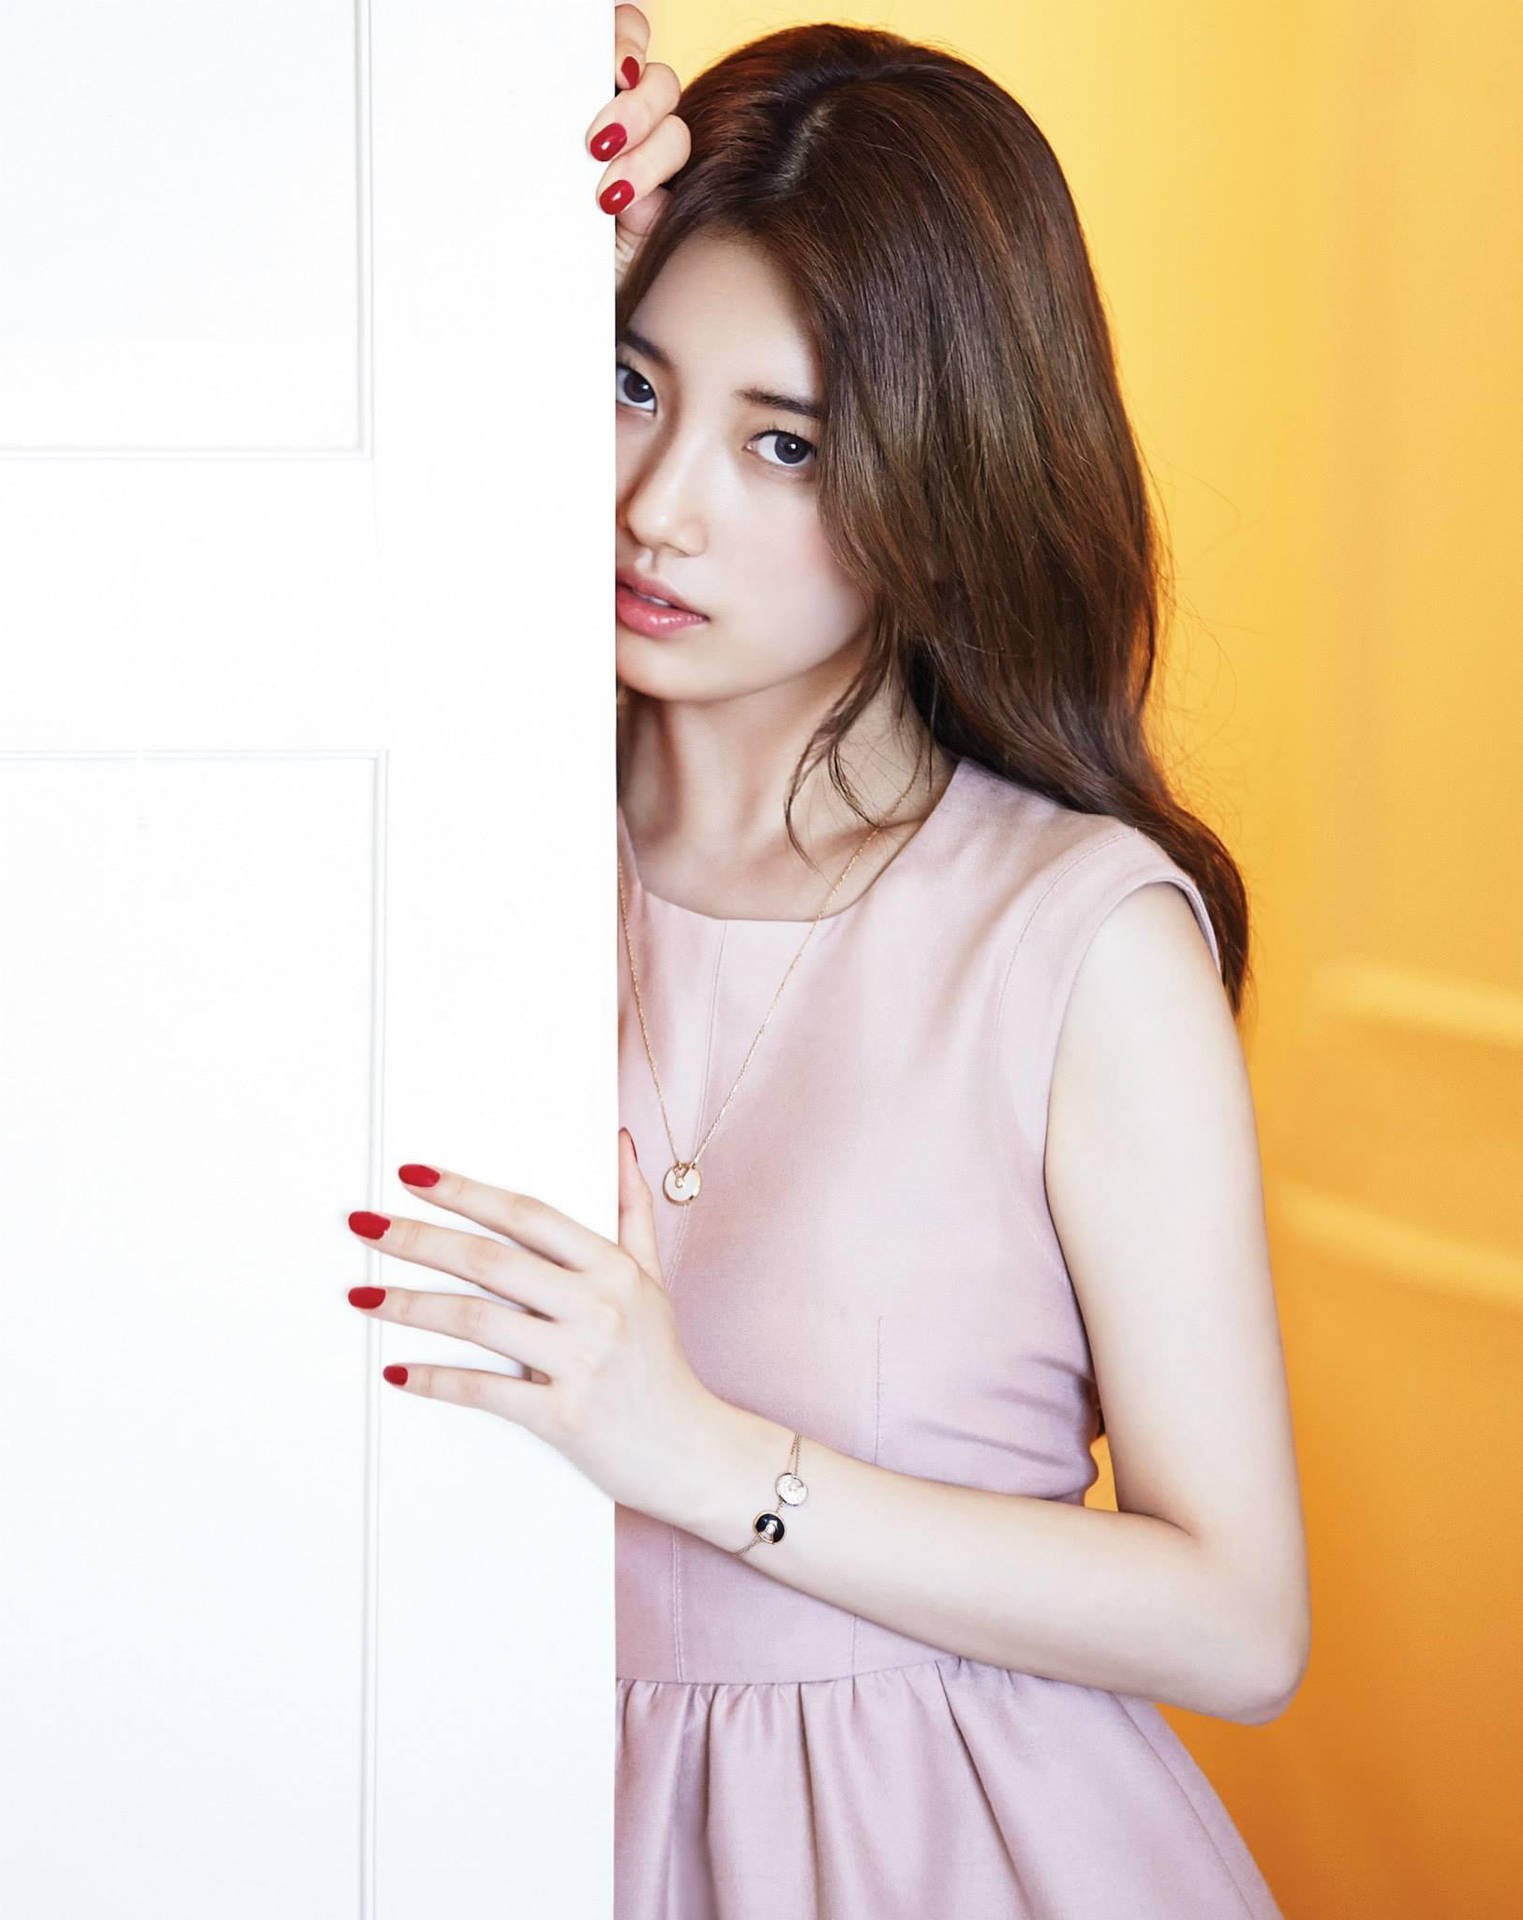 Bae Suzy In Pink Dress Background